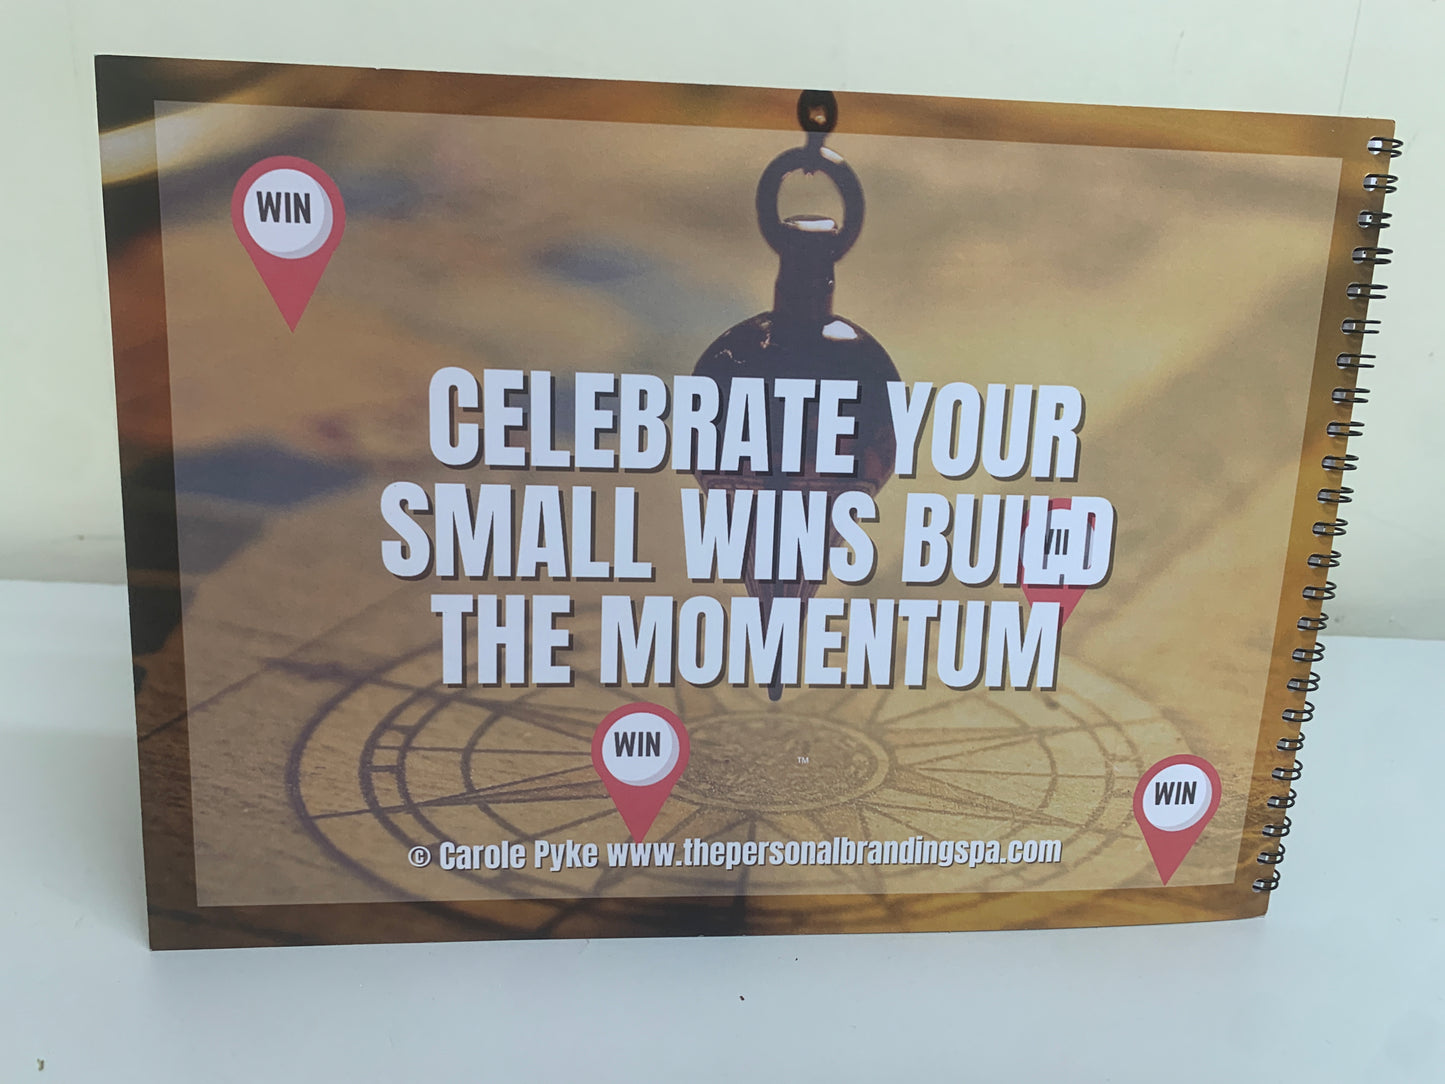 Back cover reinforcing the message: Celebrate your small wins Build the momentum